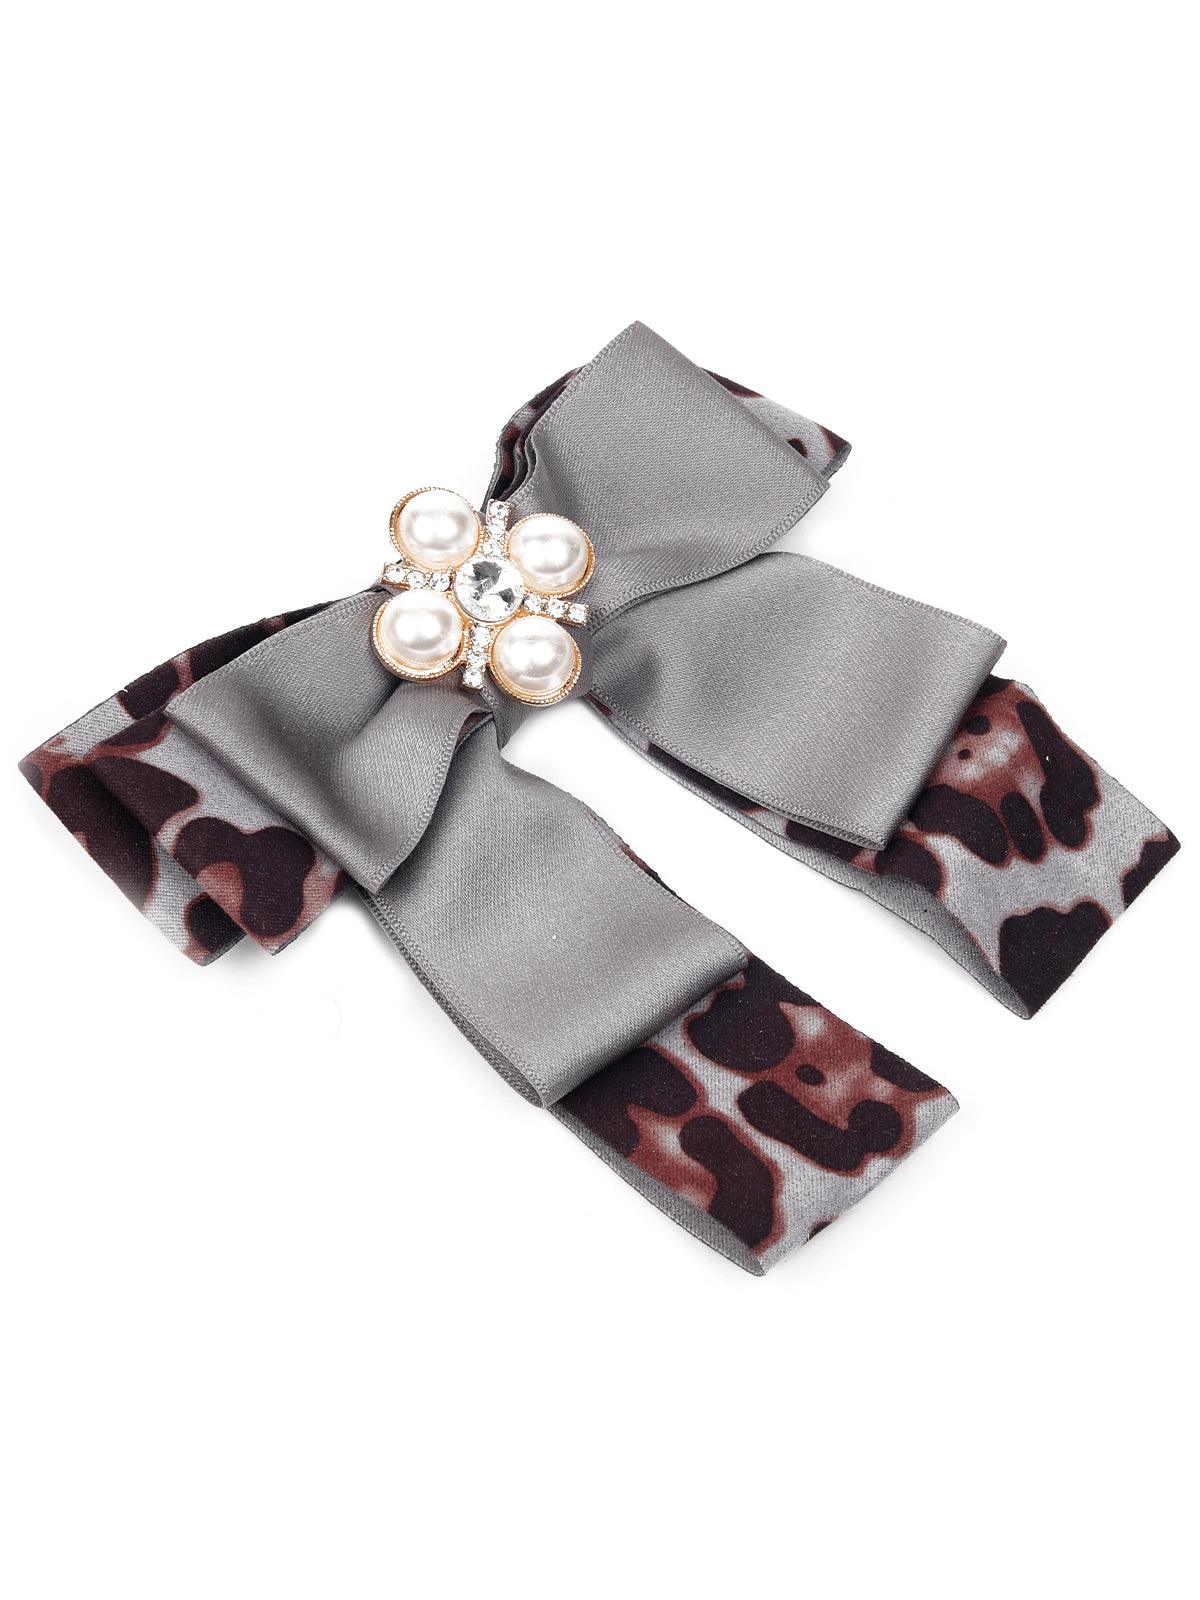 Animal print double bow floral brooch - Odette